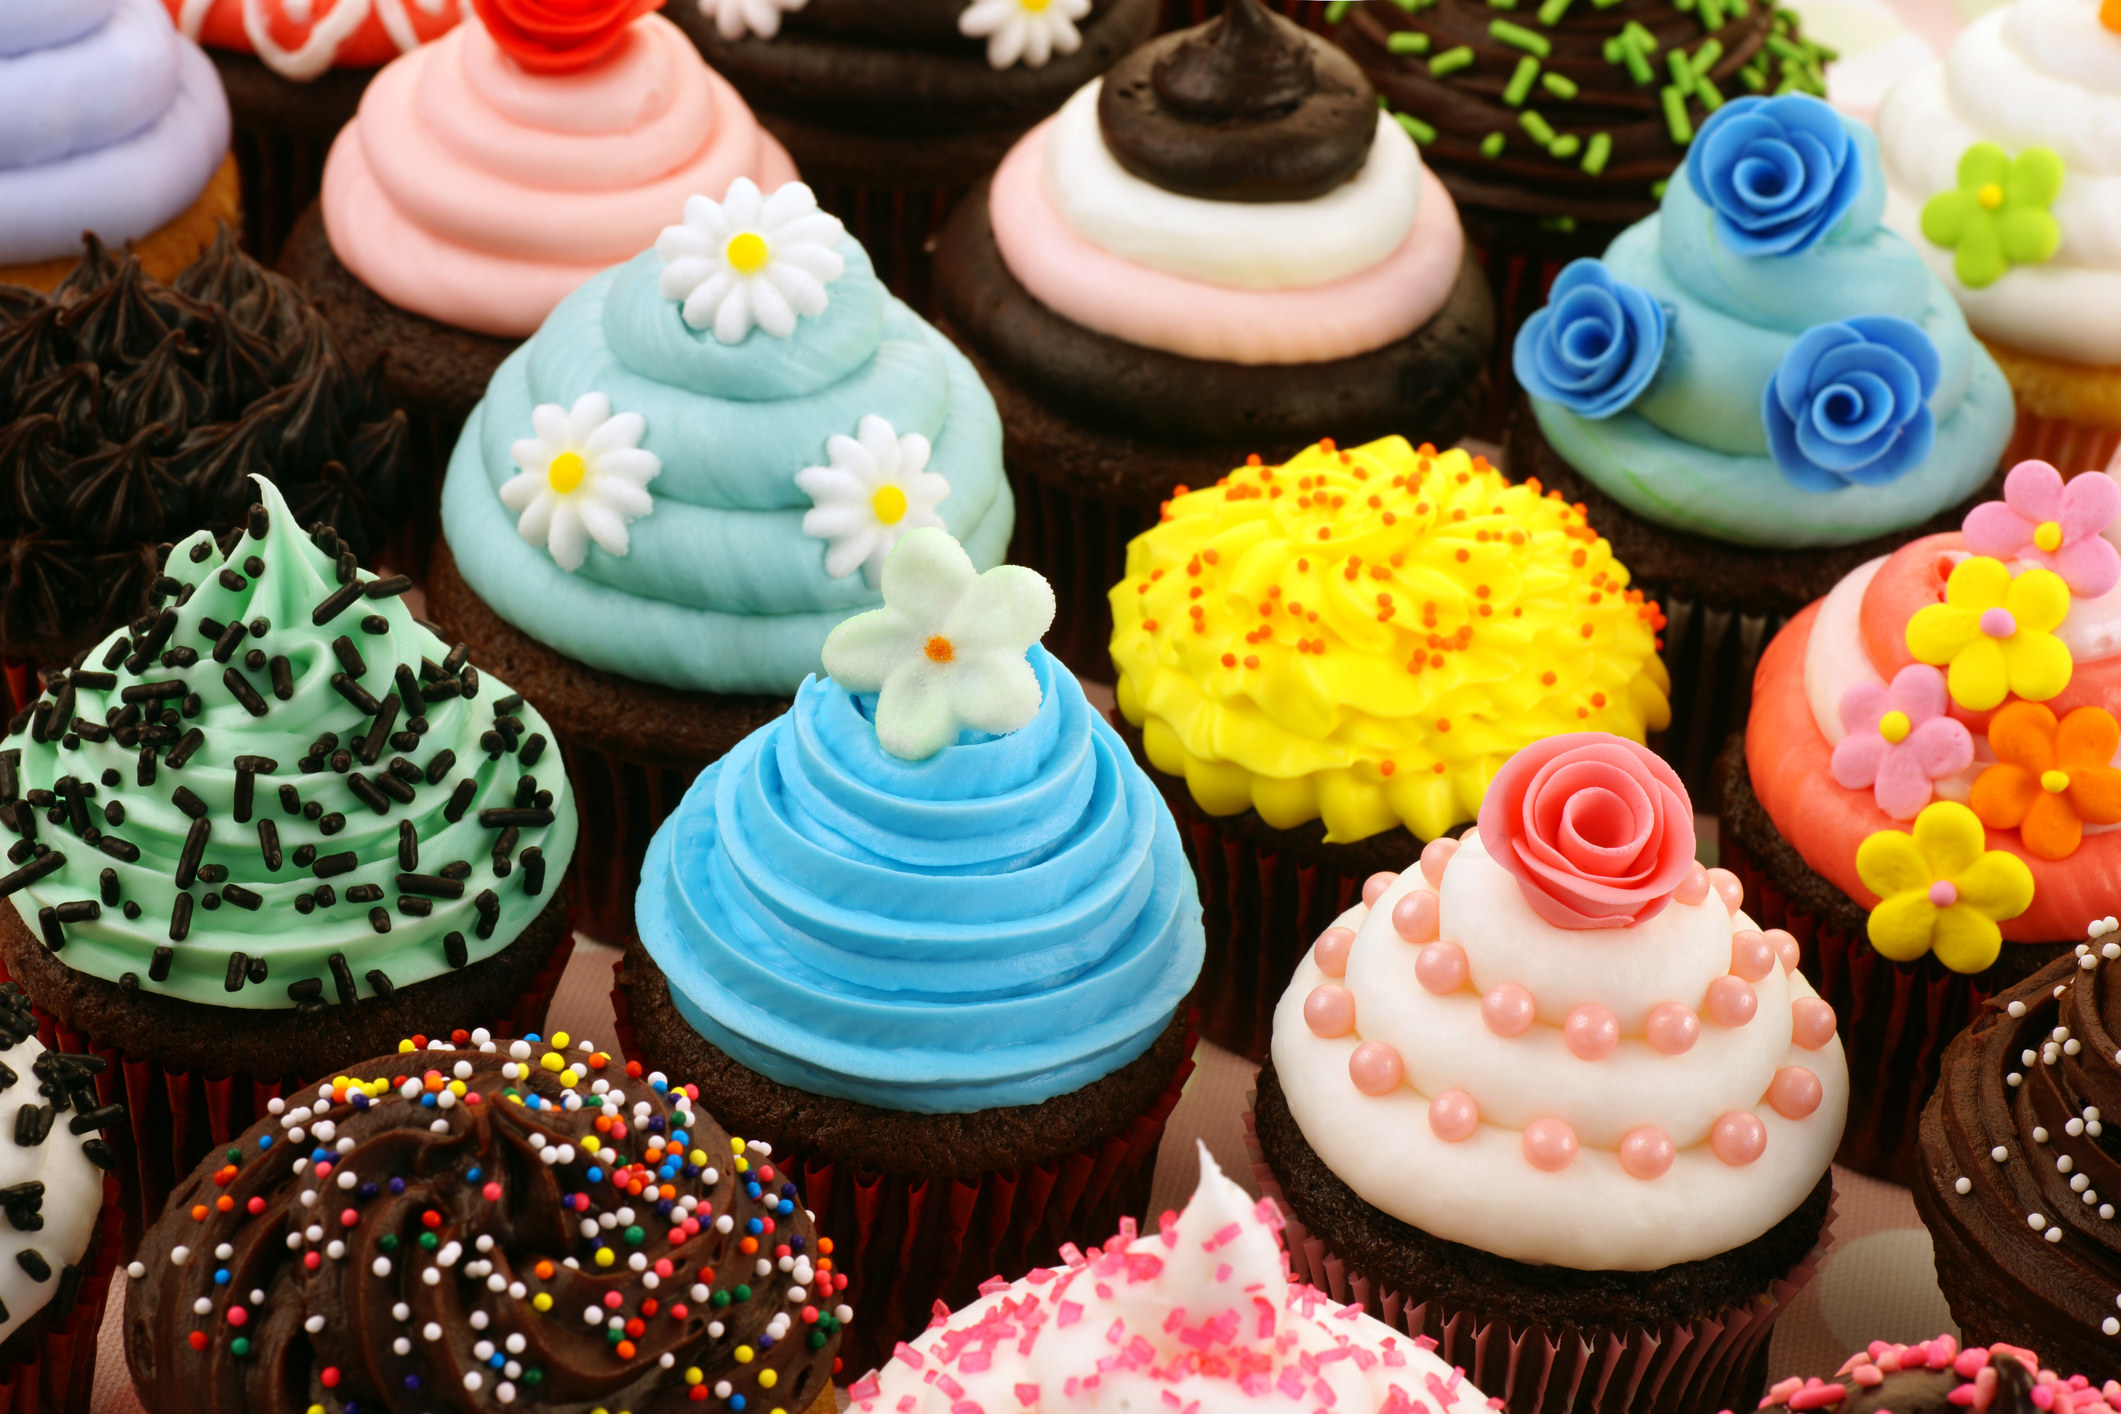 Cupcakes with diverse colors and designs